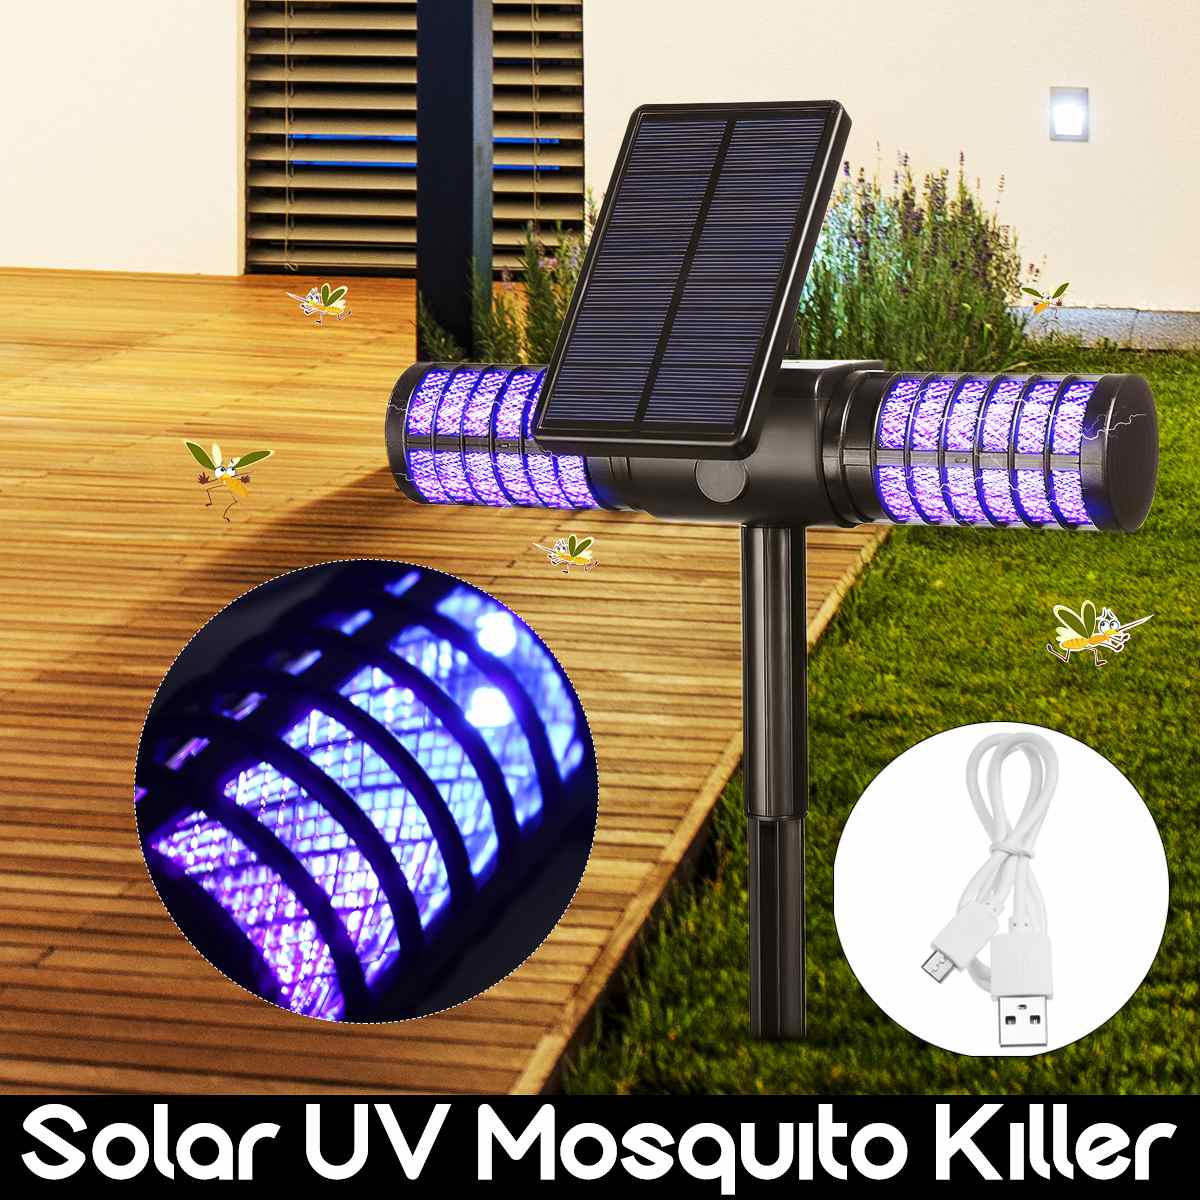 Outdoor garden mosquito killer lamp UV LED lamp IP65 waterproof insect repellent ring sunshine / USB automatic rechargeable mosquito killer lamp